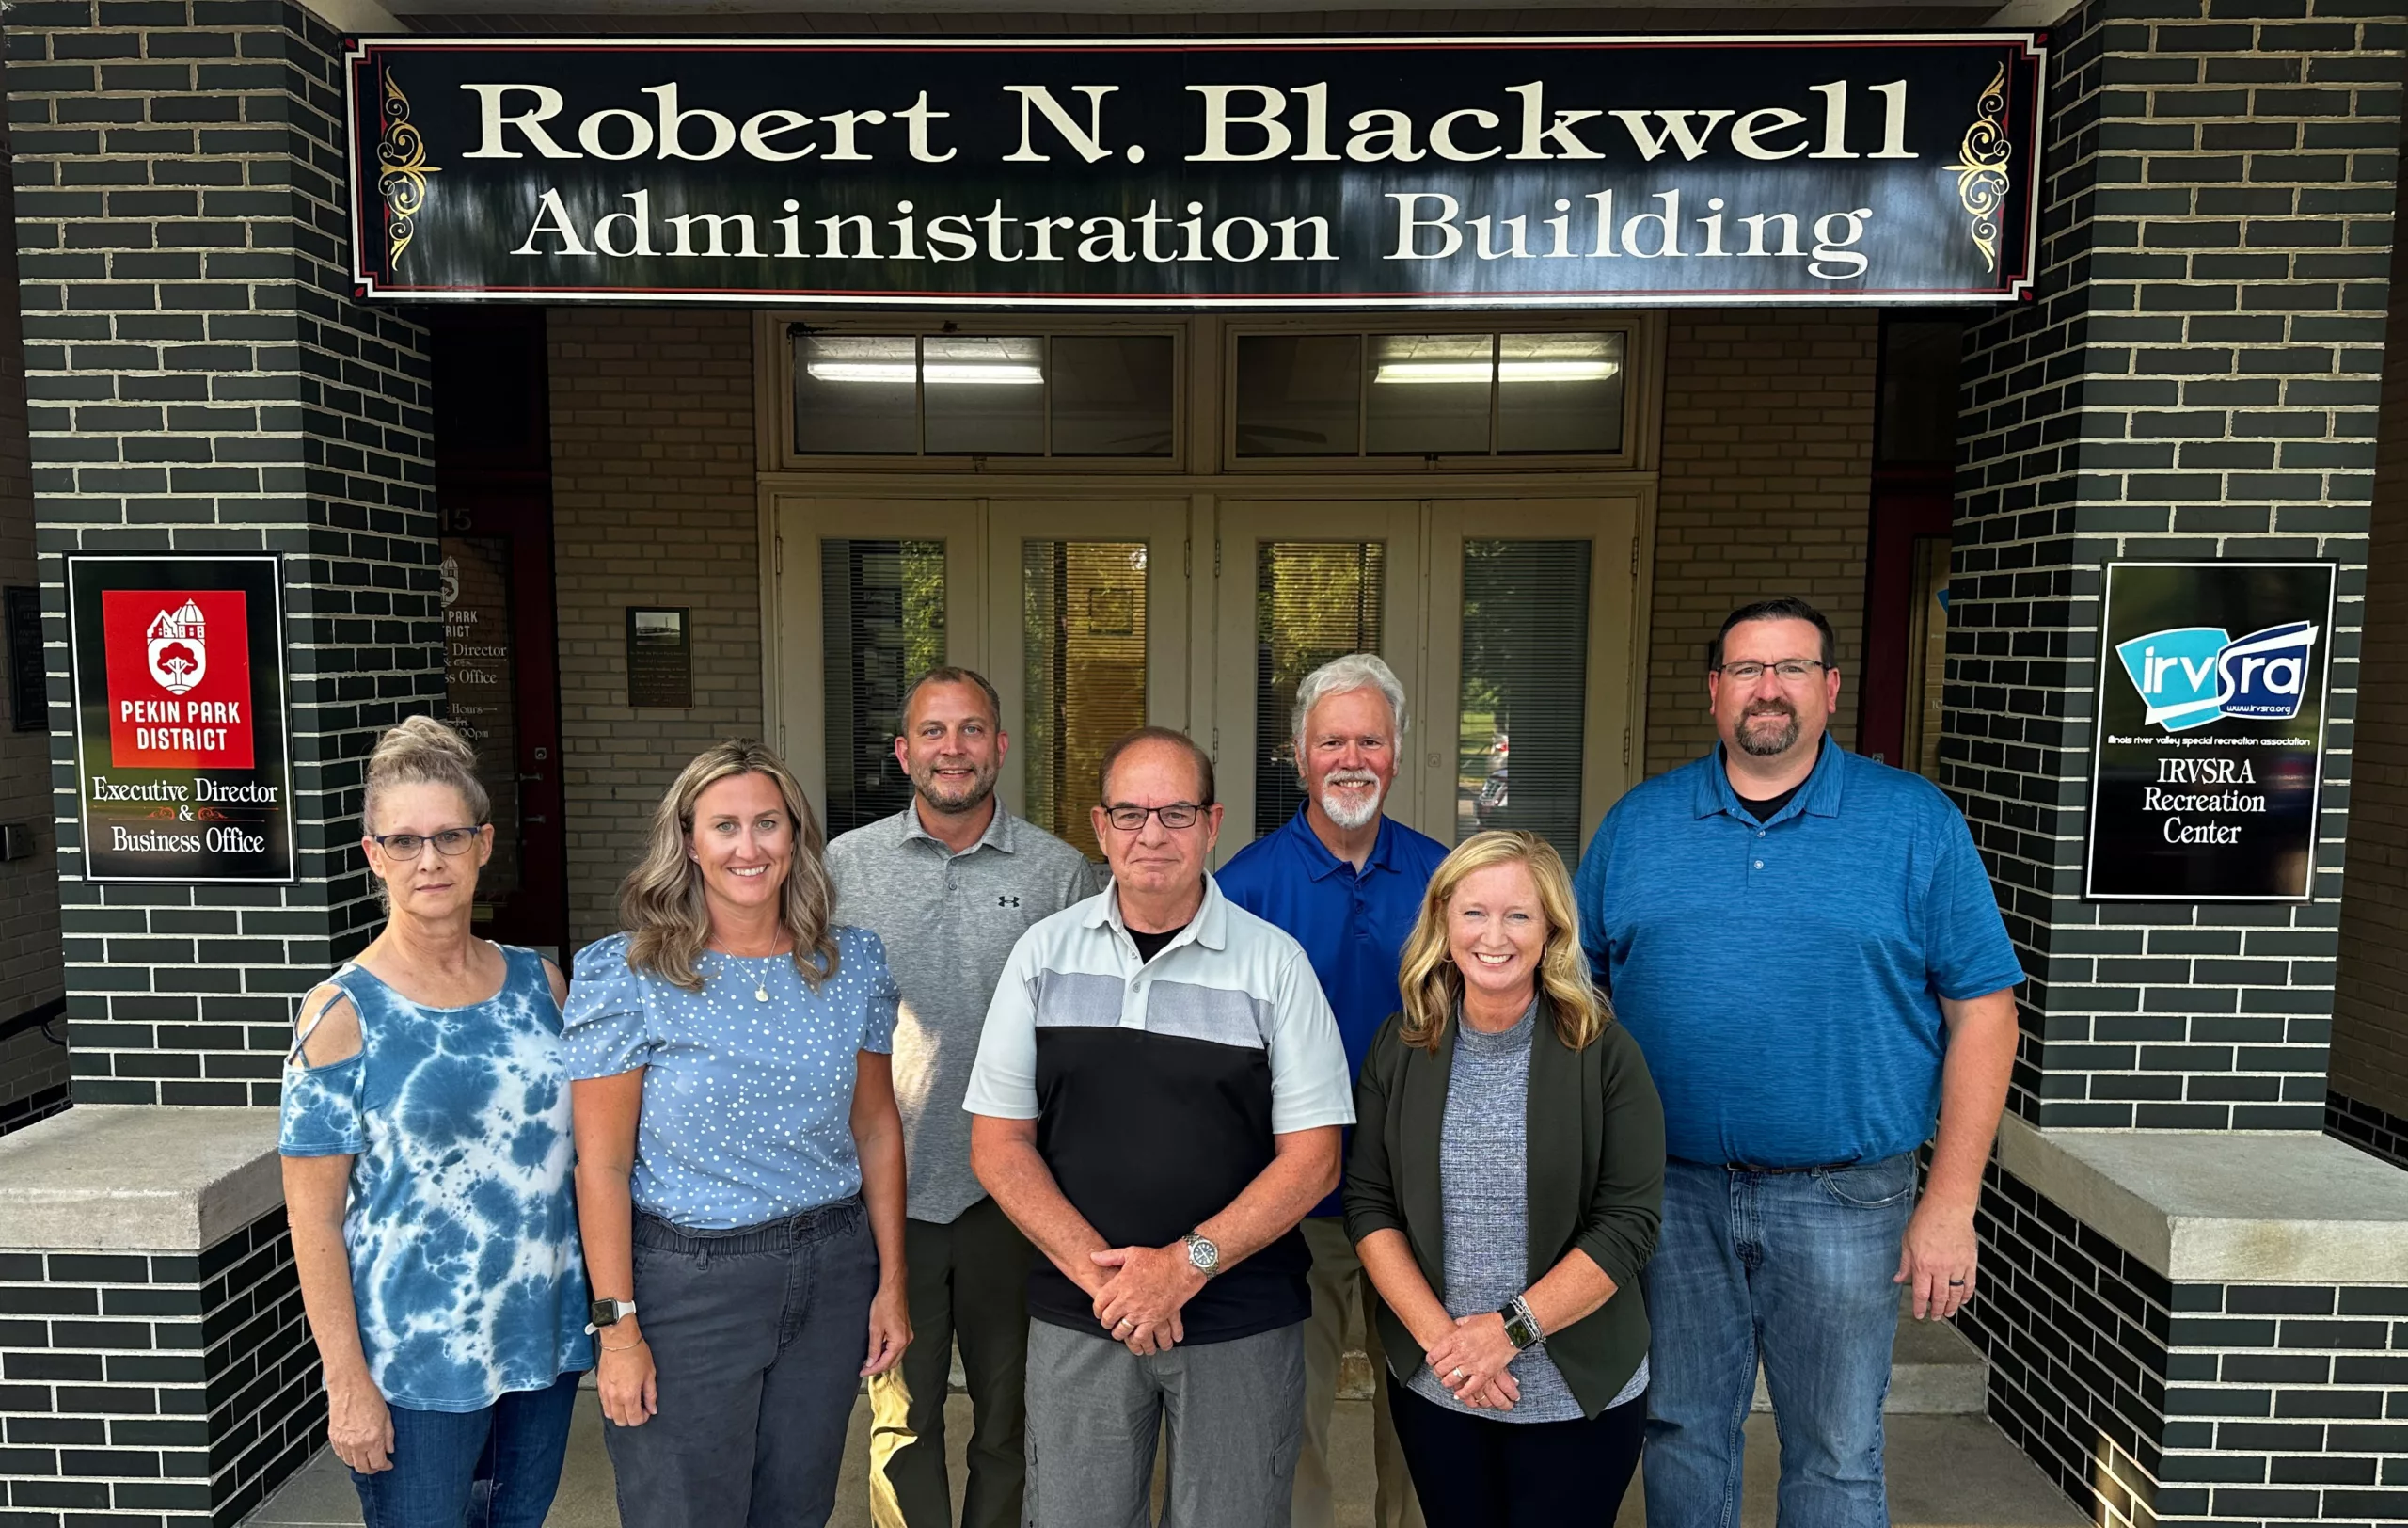 The Park Board standing in front of the Robert N. Blackwell Administration Building